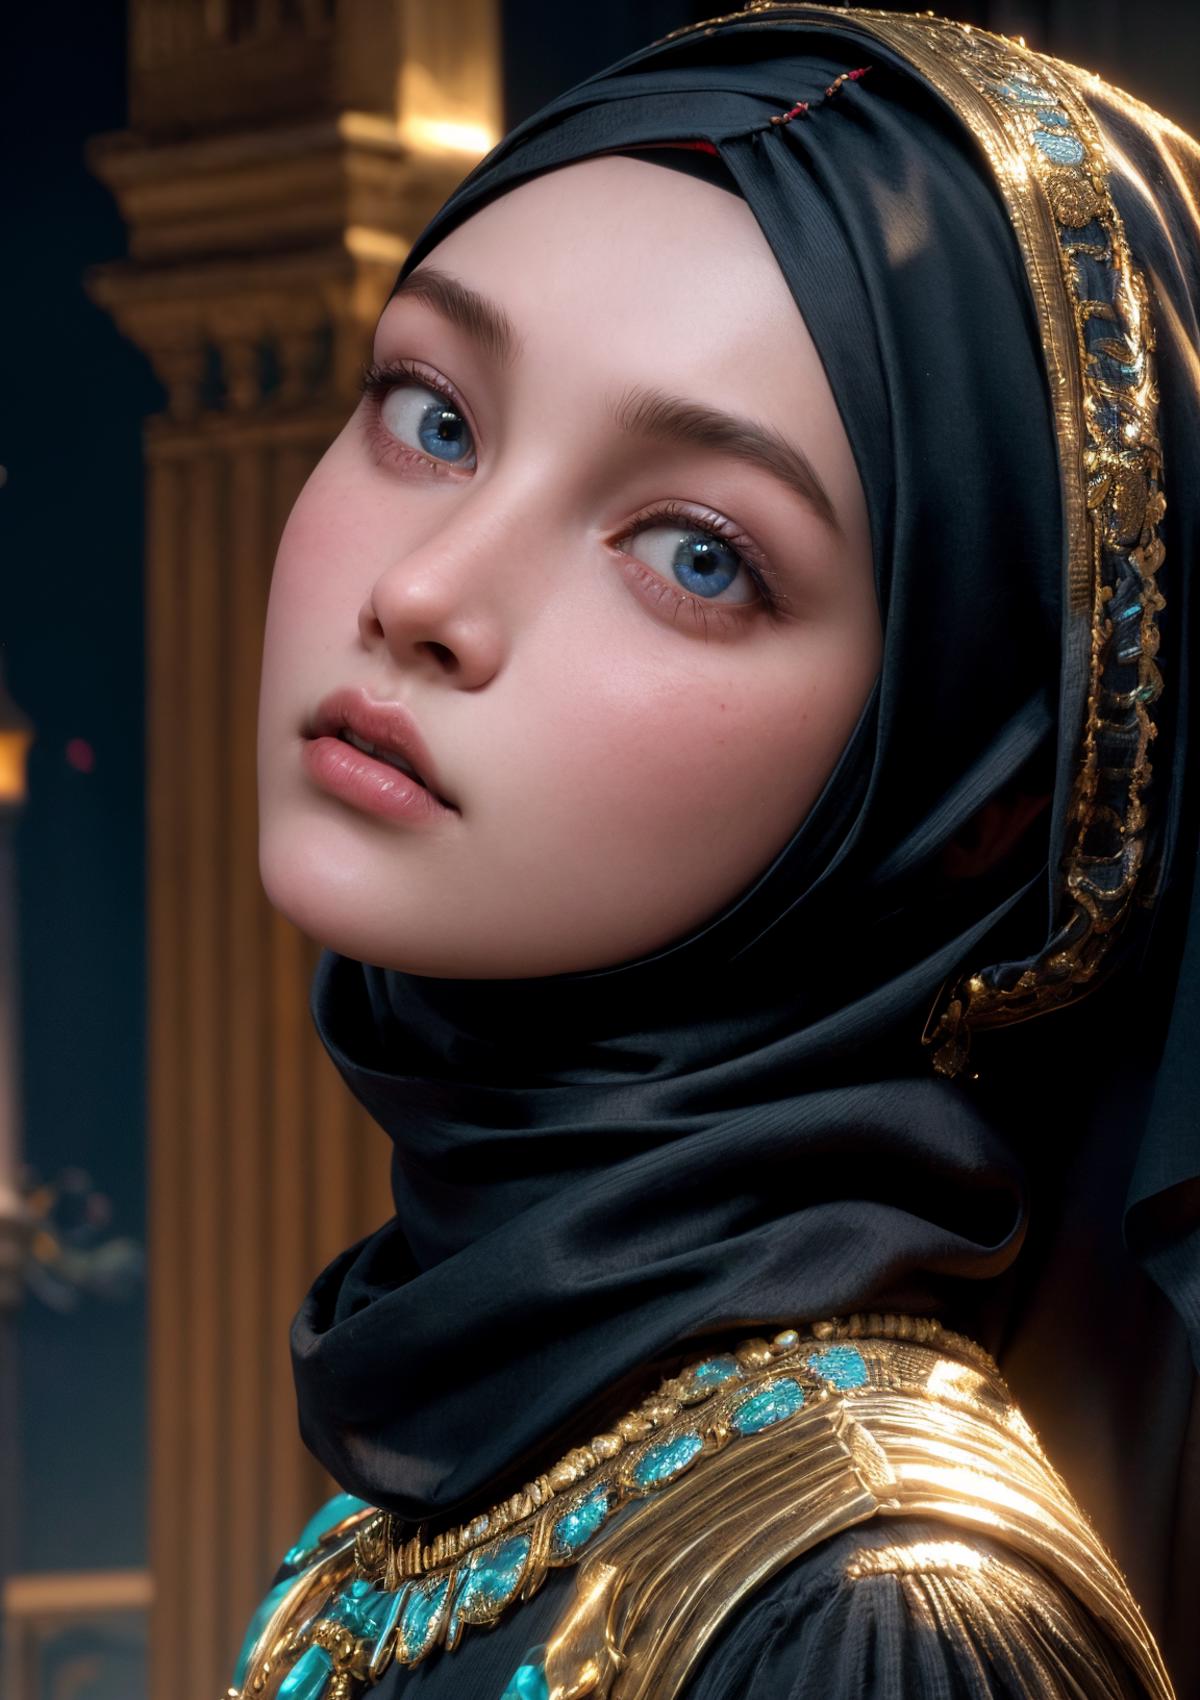 A young girl with blue eyes and a black head scarf.